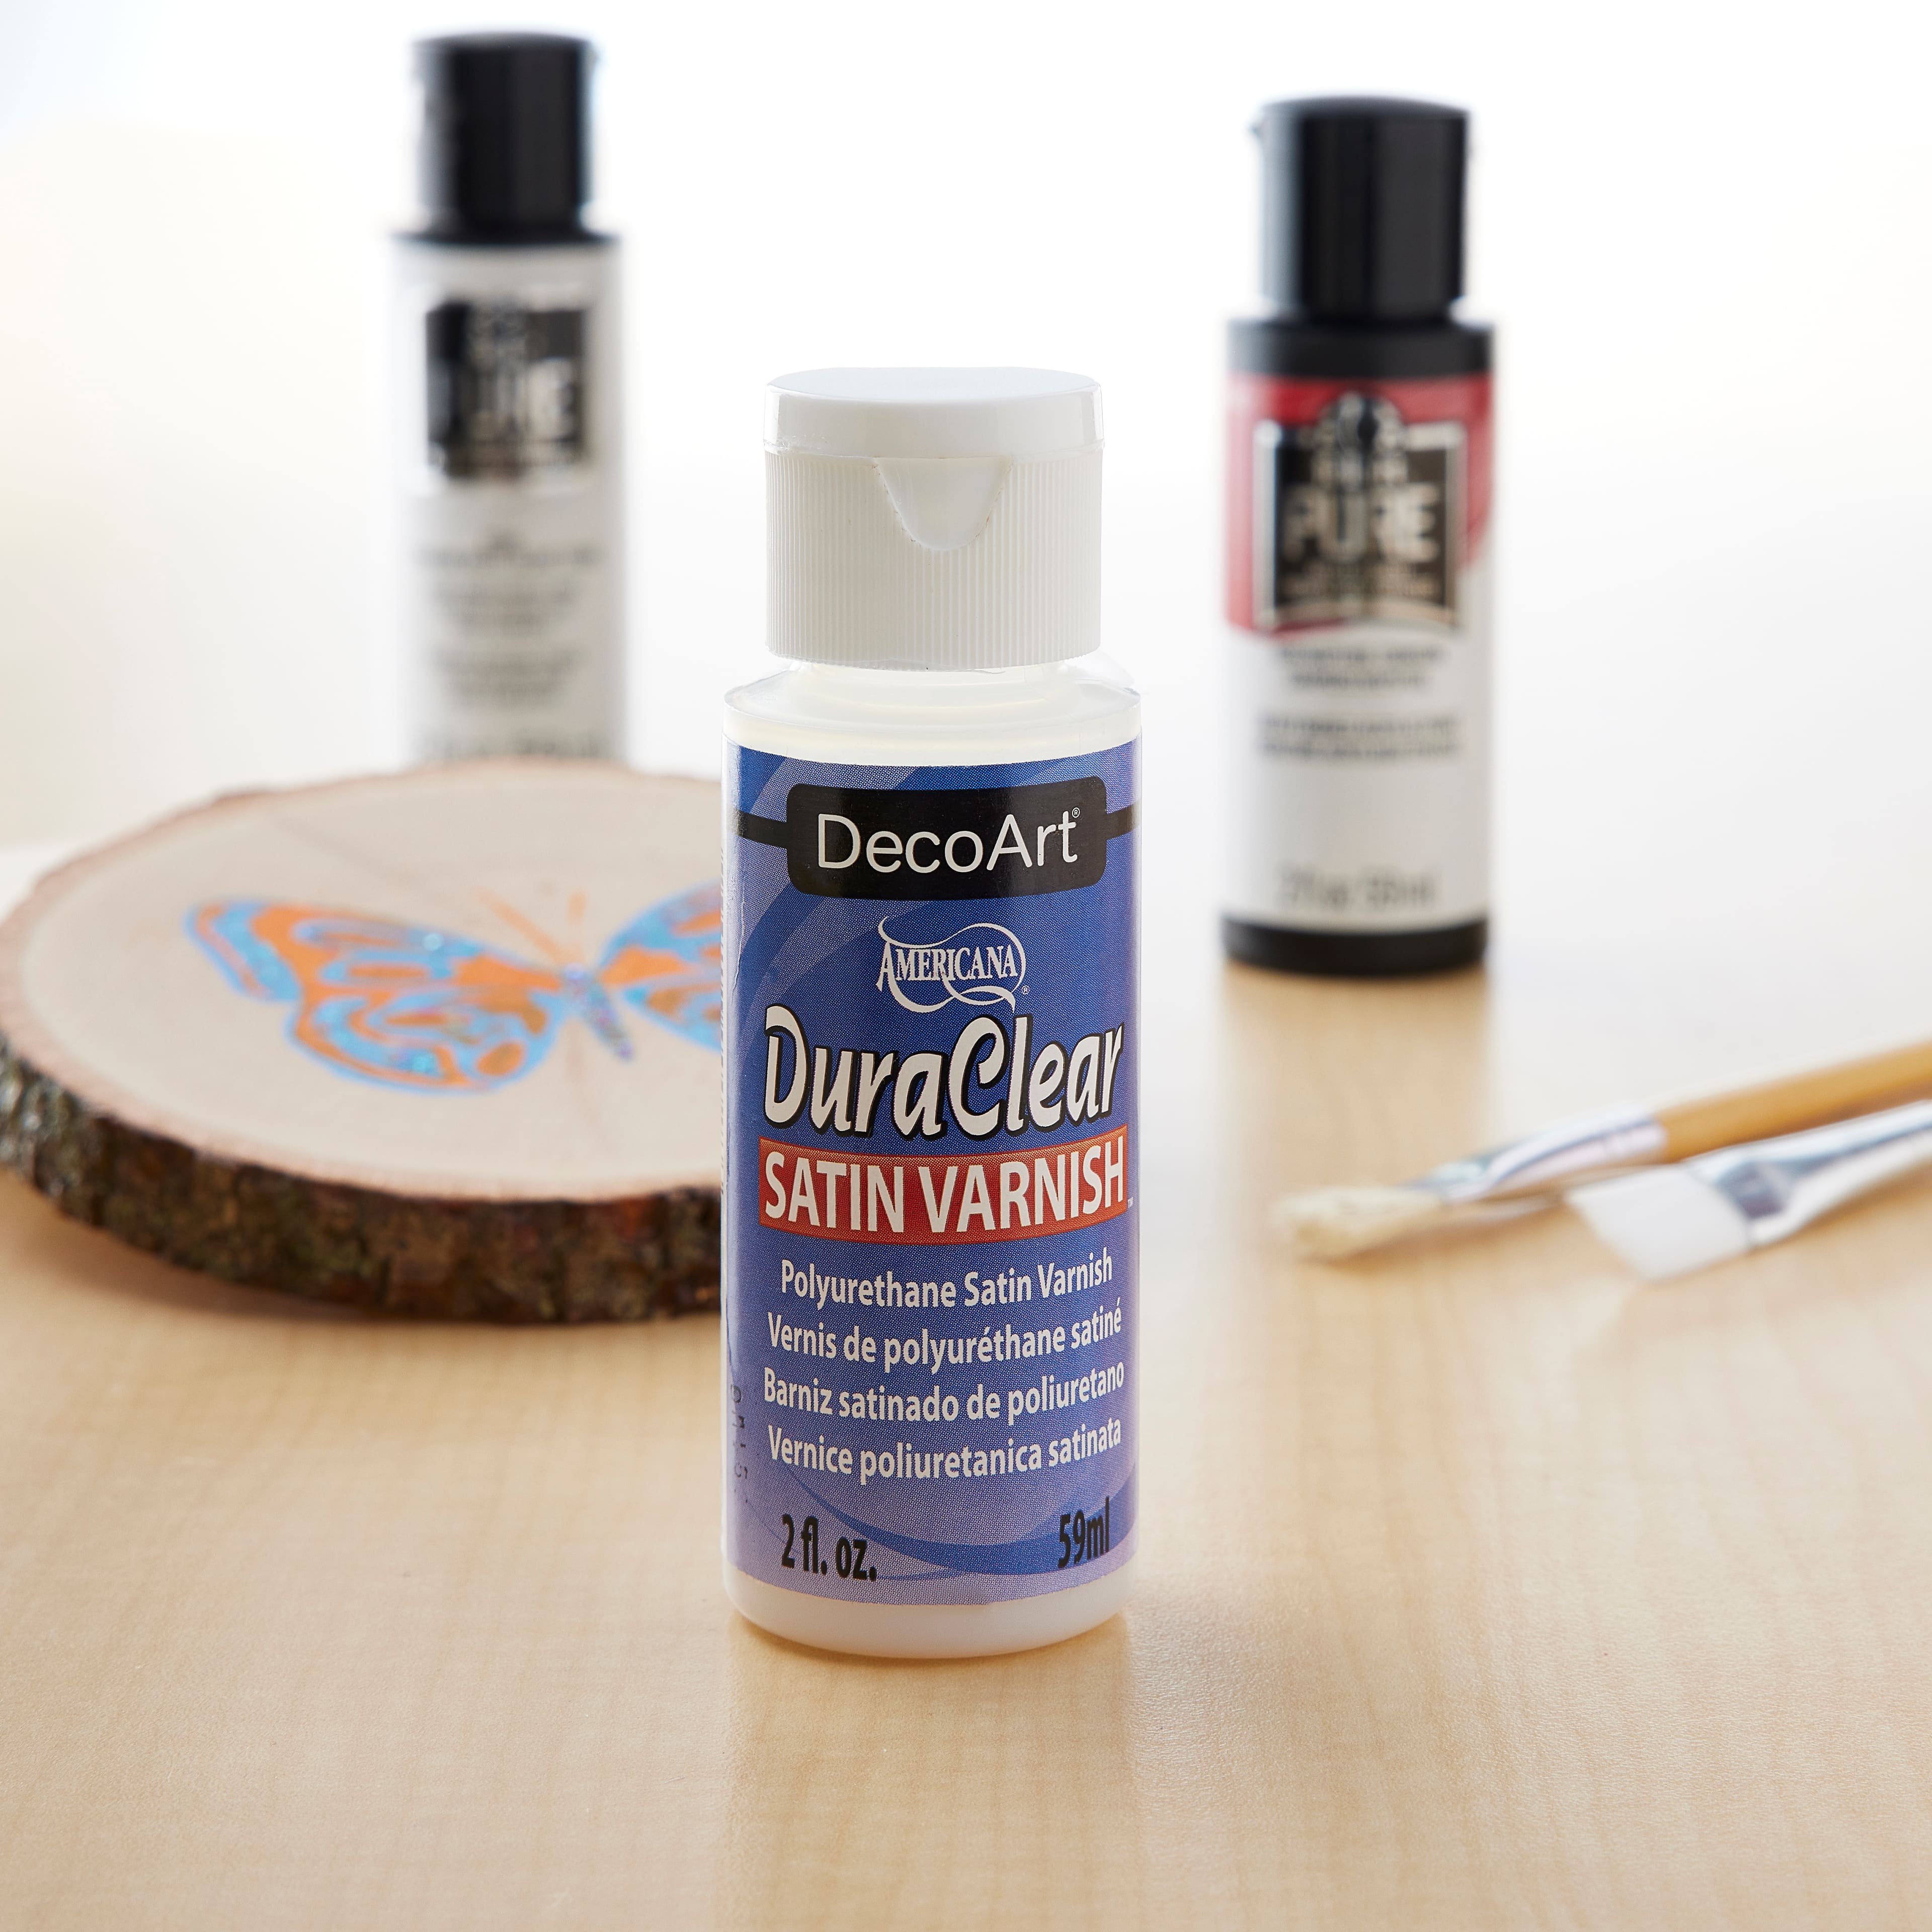 DuraClear Gloss Varnish 2 oz. in 2023  Varnish, Painting accessories,  Painting crafts